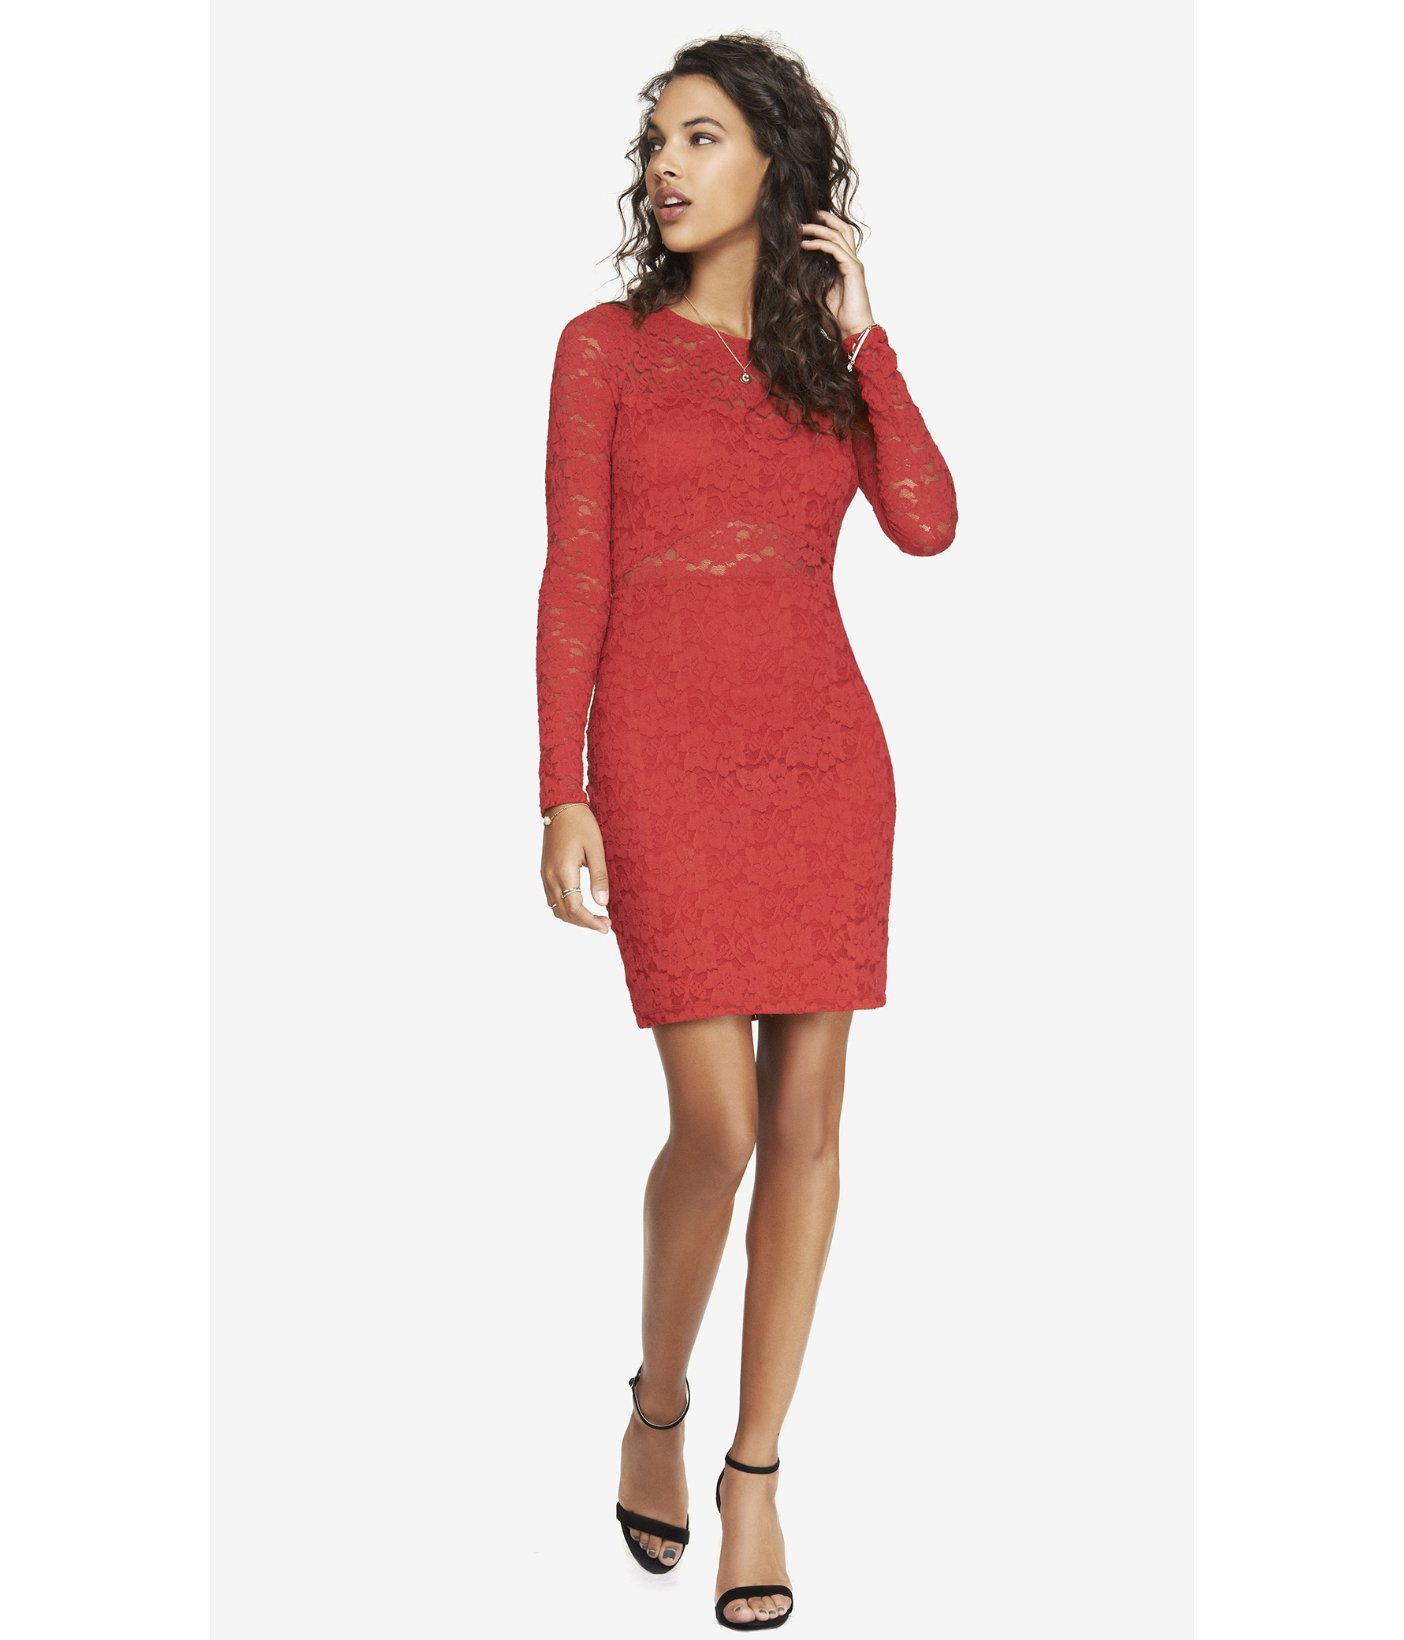 Red sheath dresses for women at express stores